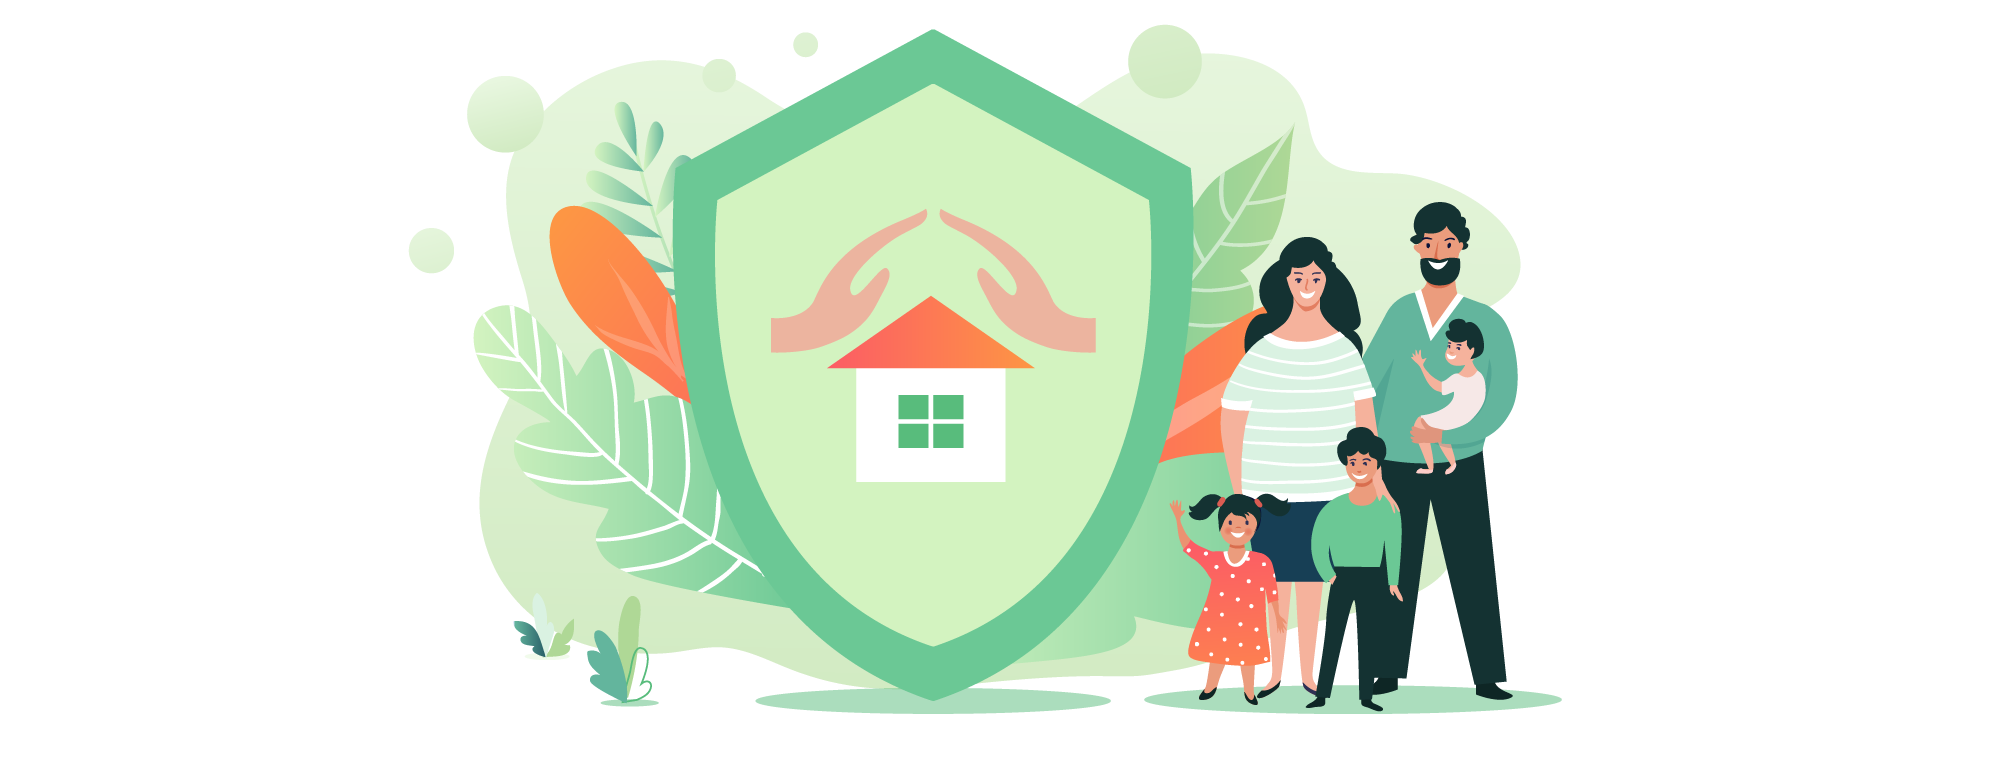 Home Contents Insurance Header Image